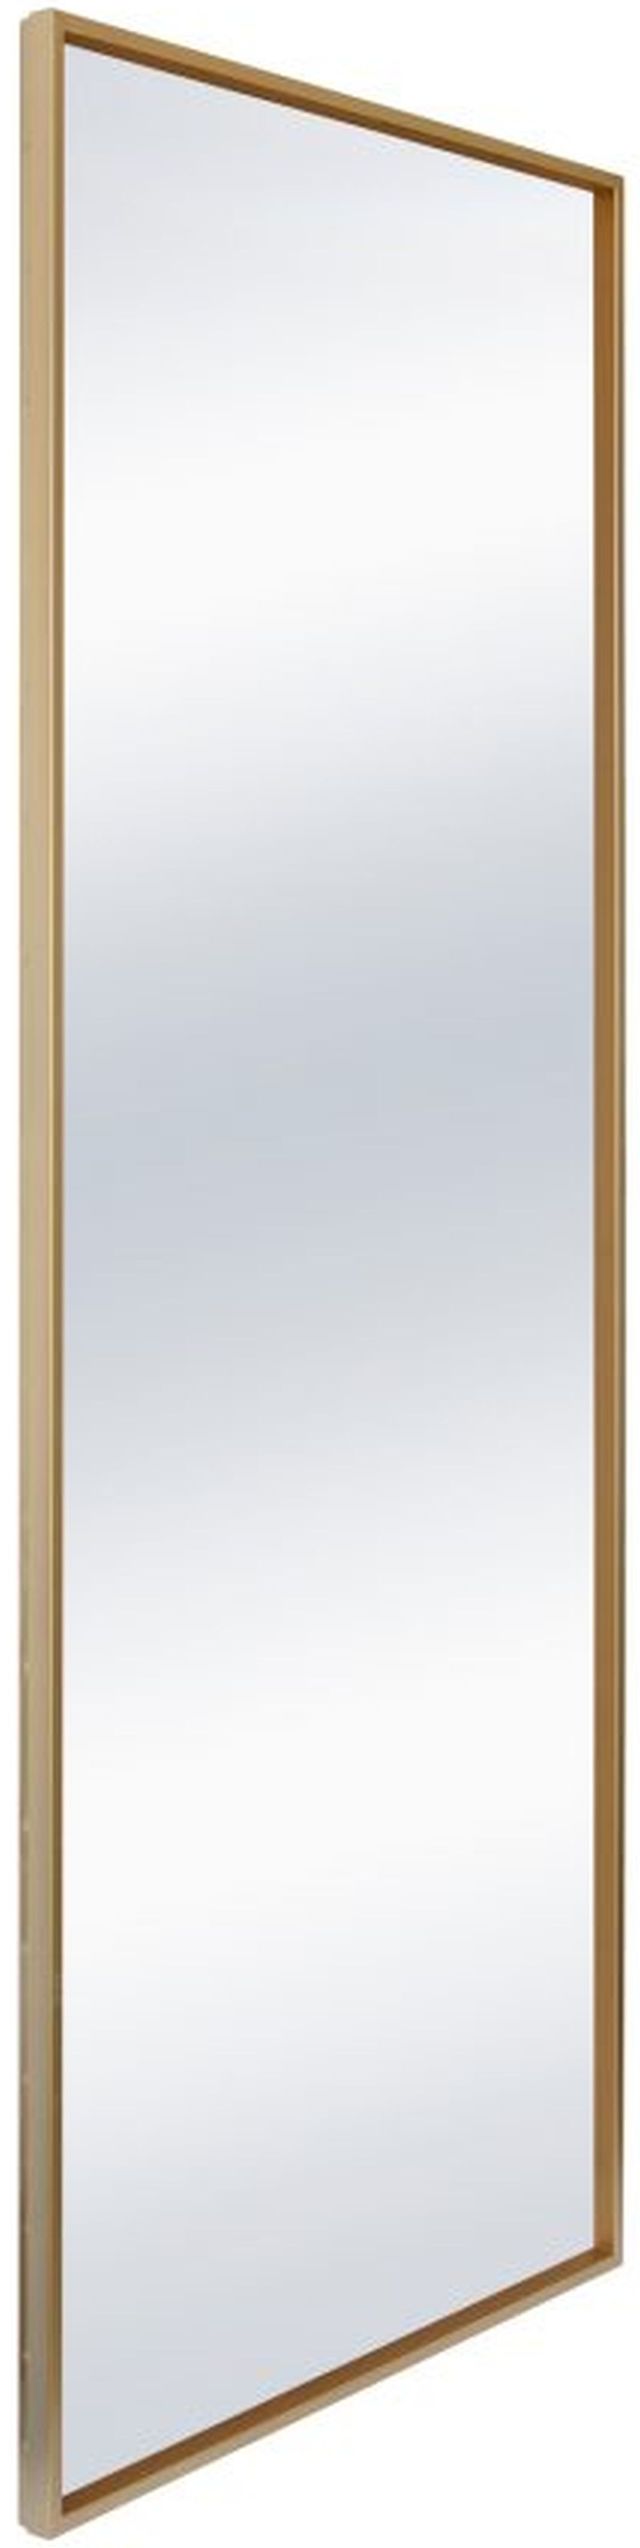 Moe's Home Collections Squire Gold Mirror 0